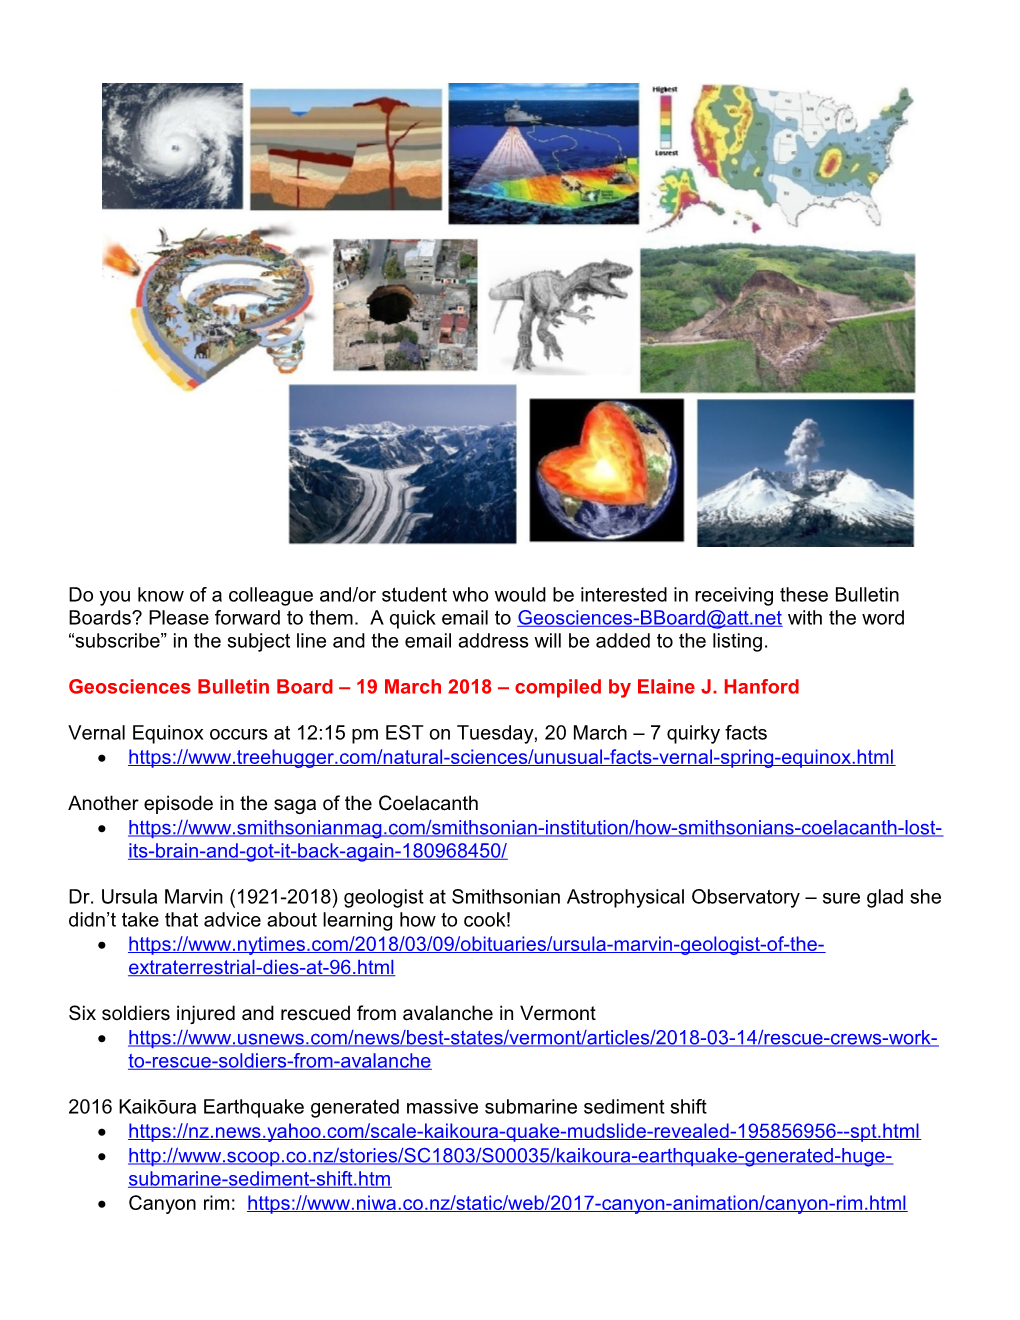 Geosciences Bulletin Board 19 March 2018 Compiled by Elaine J. Hanford